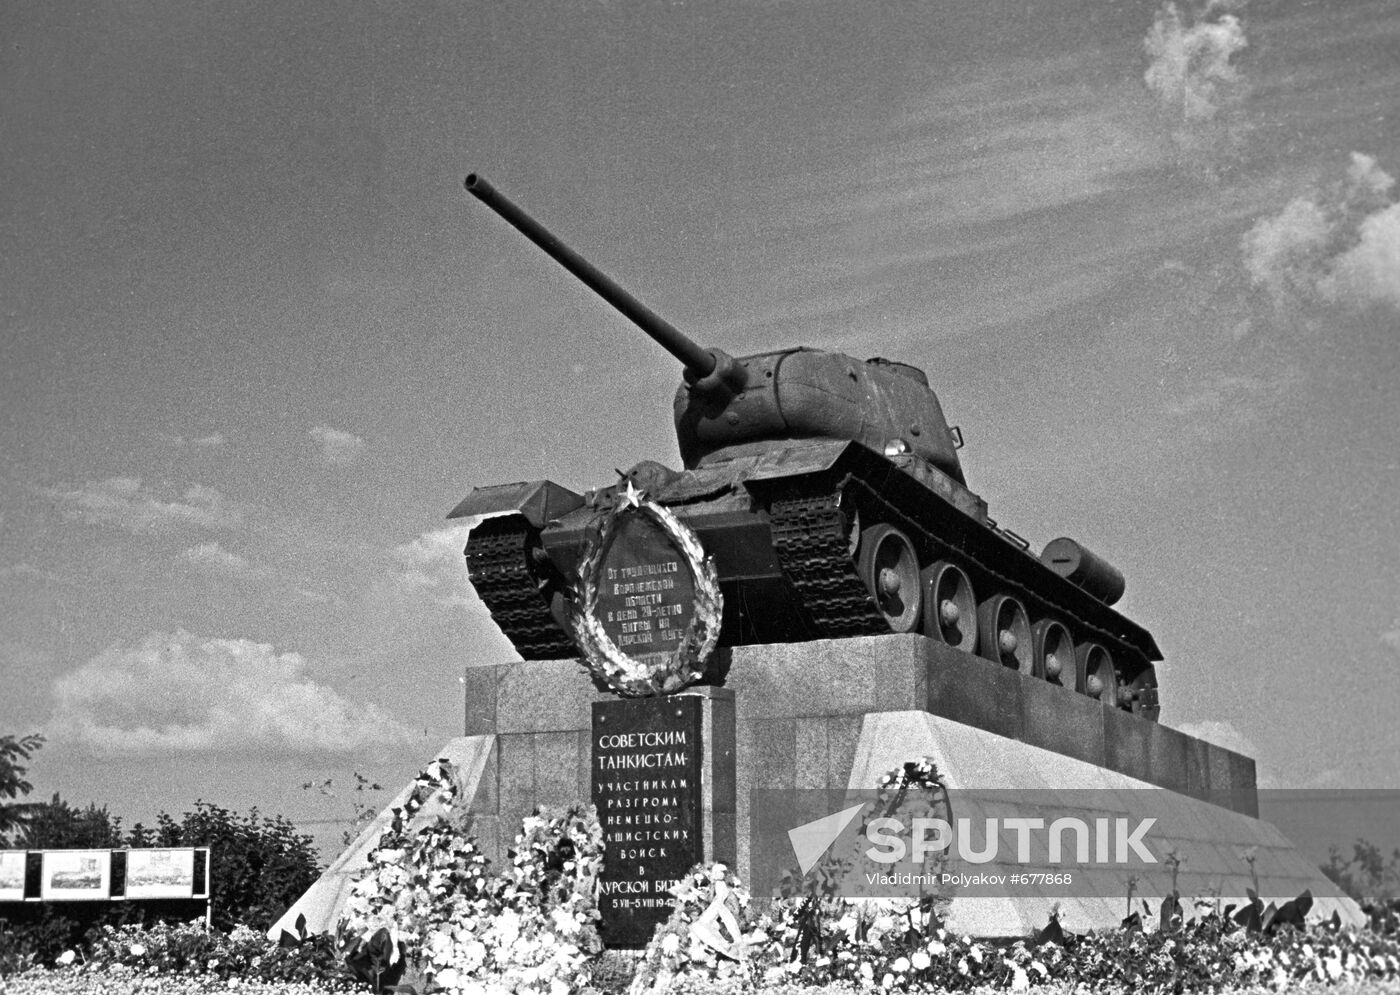 Monument to soviet tankmen participating in the Battle of Kursk